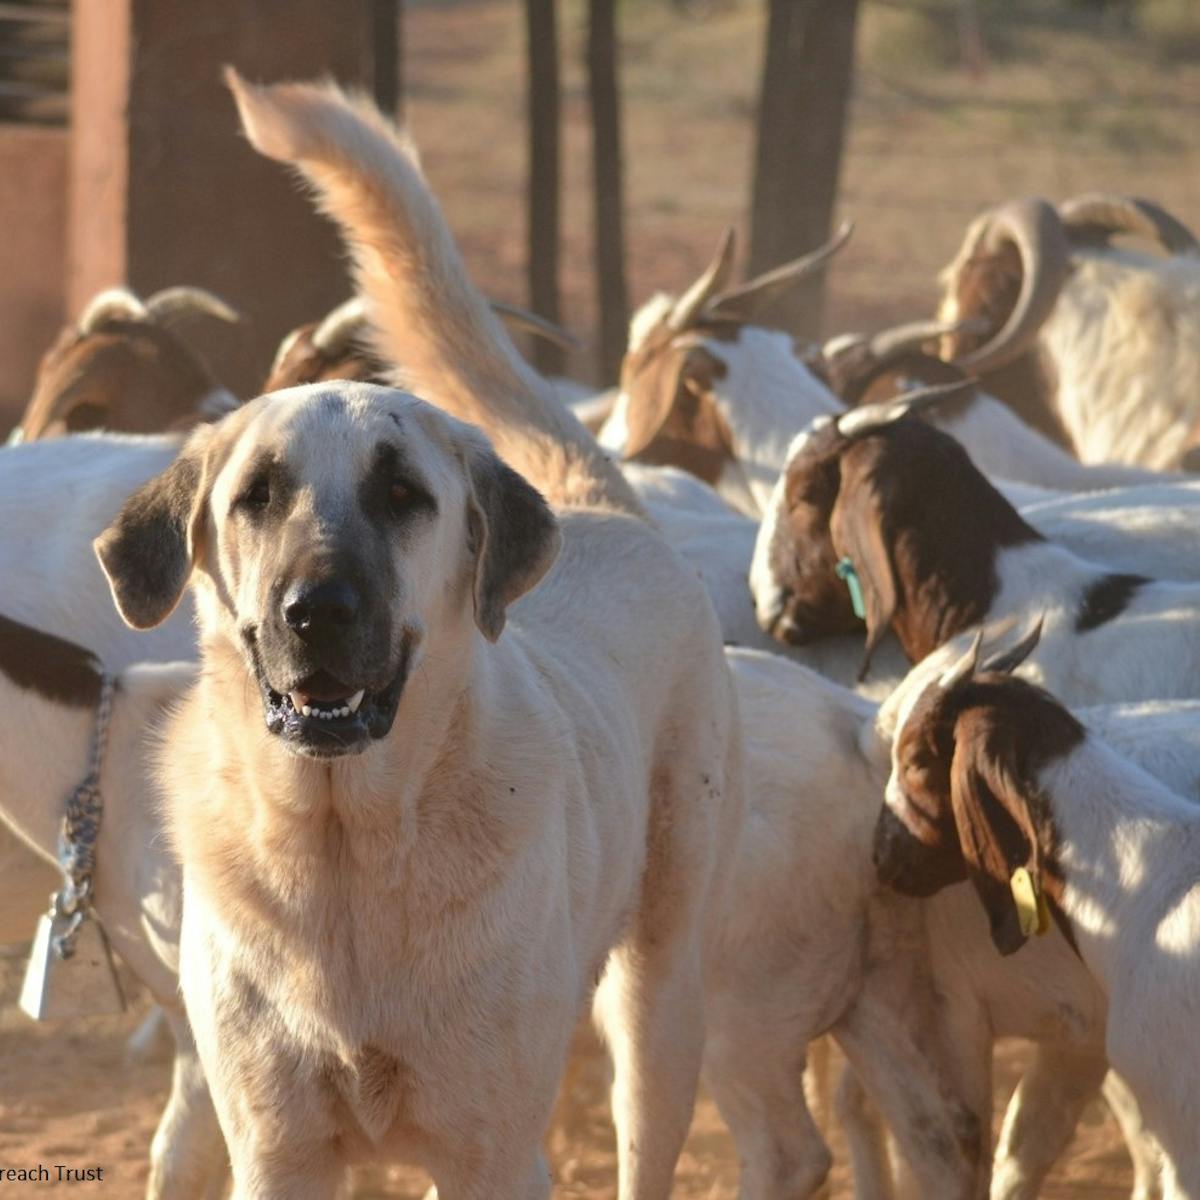 Dogs used to guard livestock may have unintended costs to wildlife